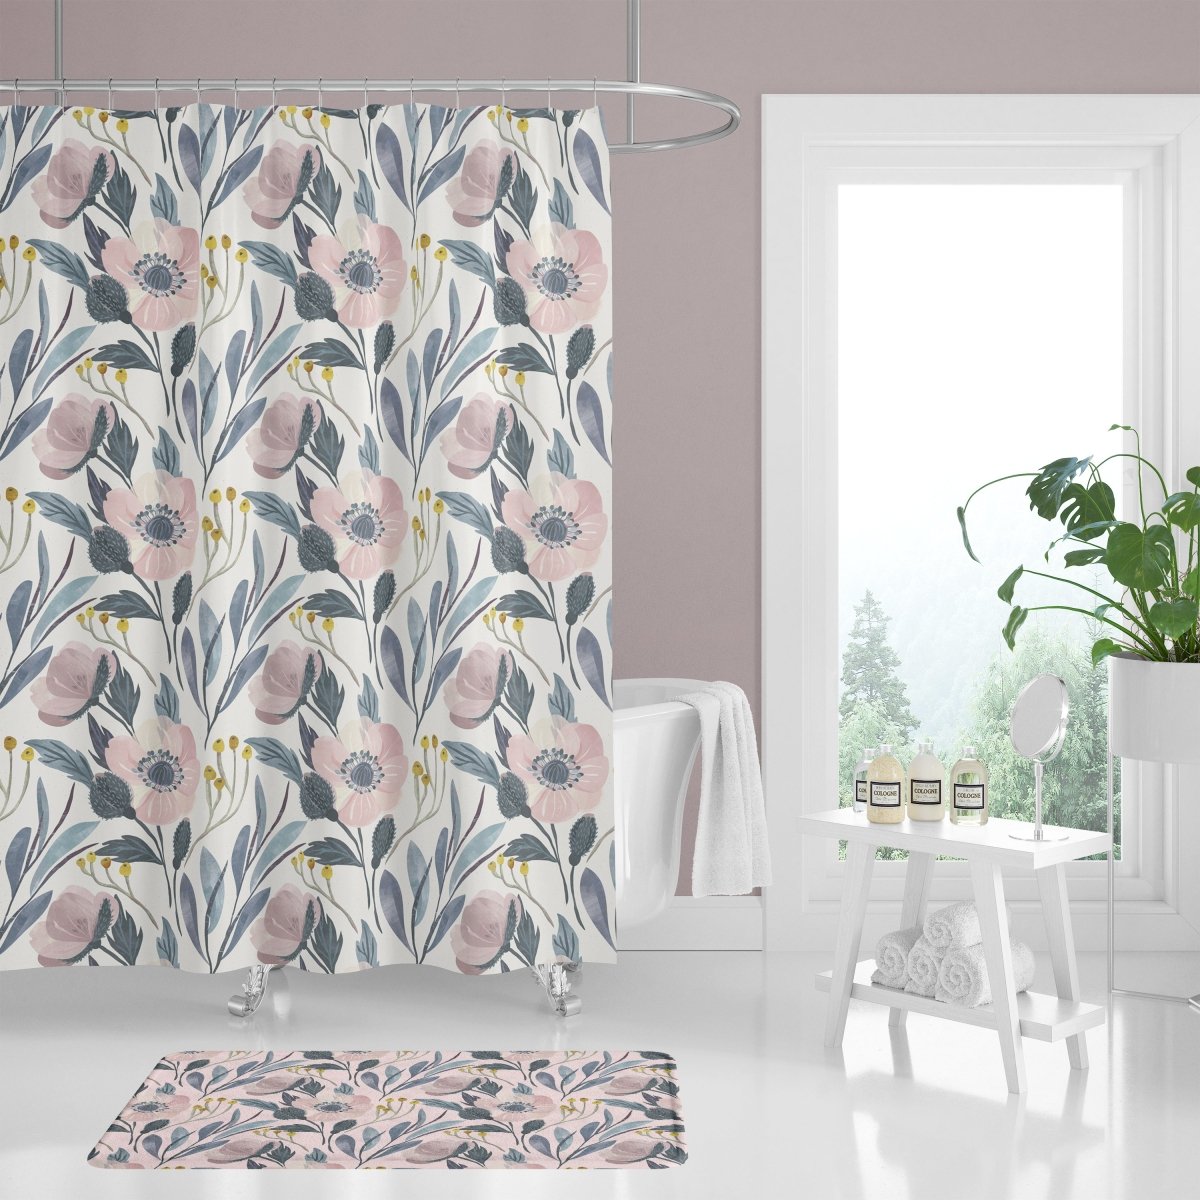 Moody Floral Bathroom Collection - gender_girl, Moody Floral, Theme_Floral